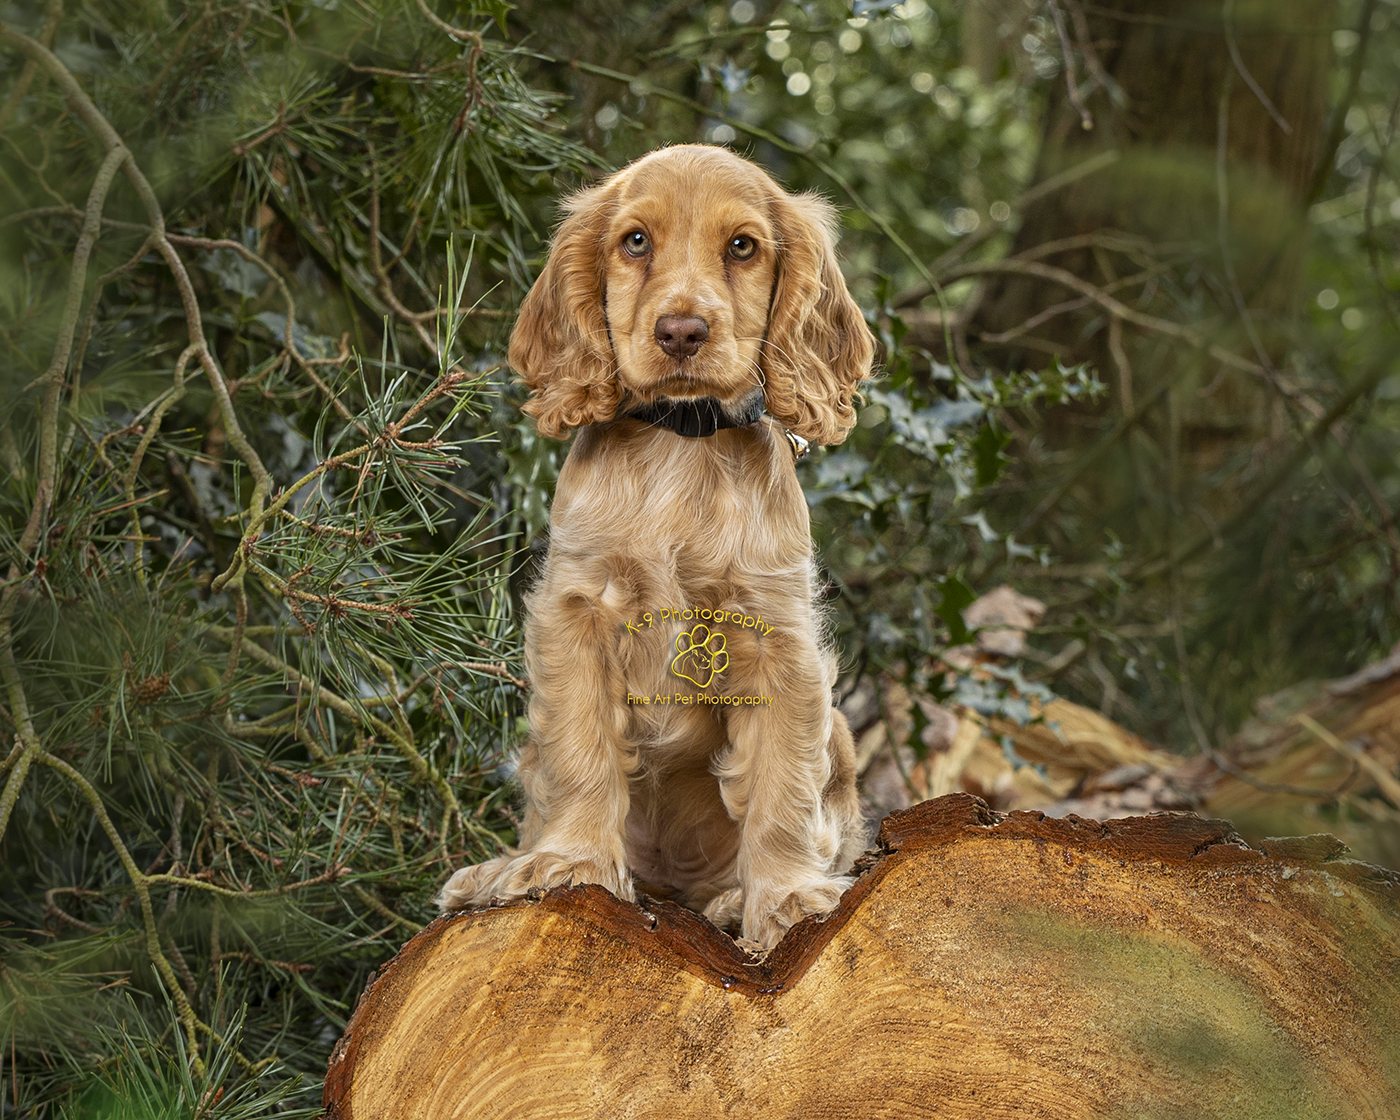 Adorable puppy photography from Bedfordshire dog photographer Adrian Bullers